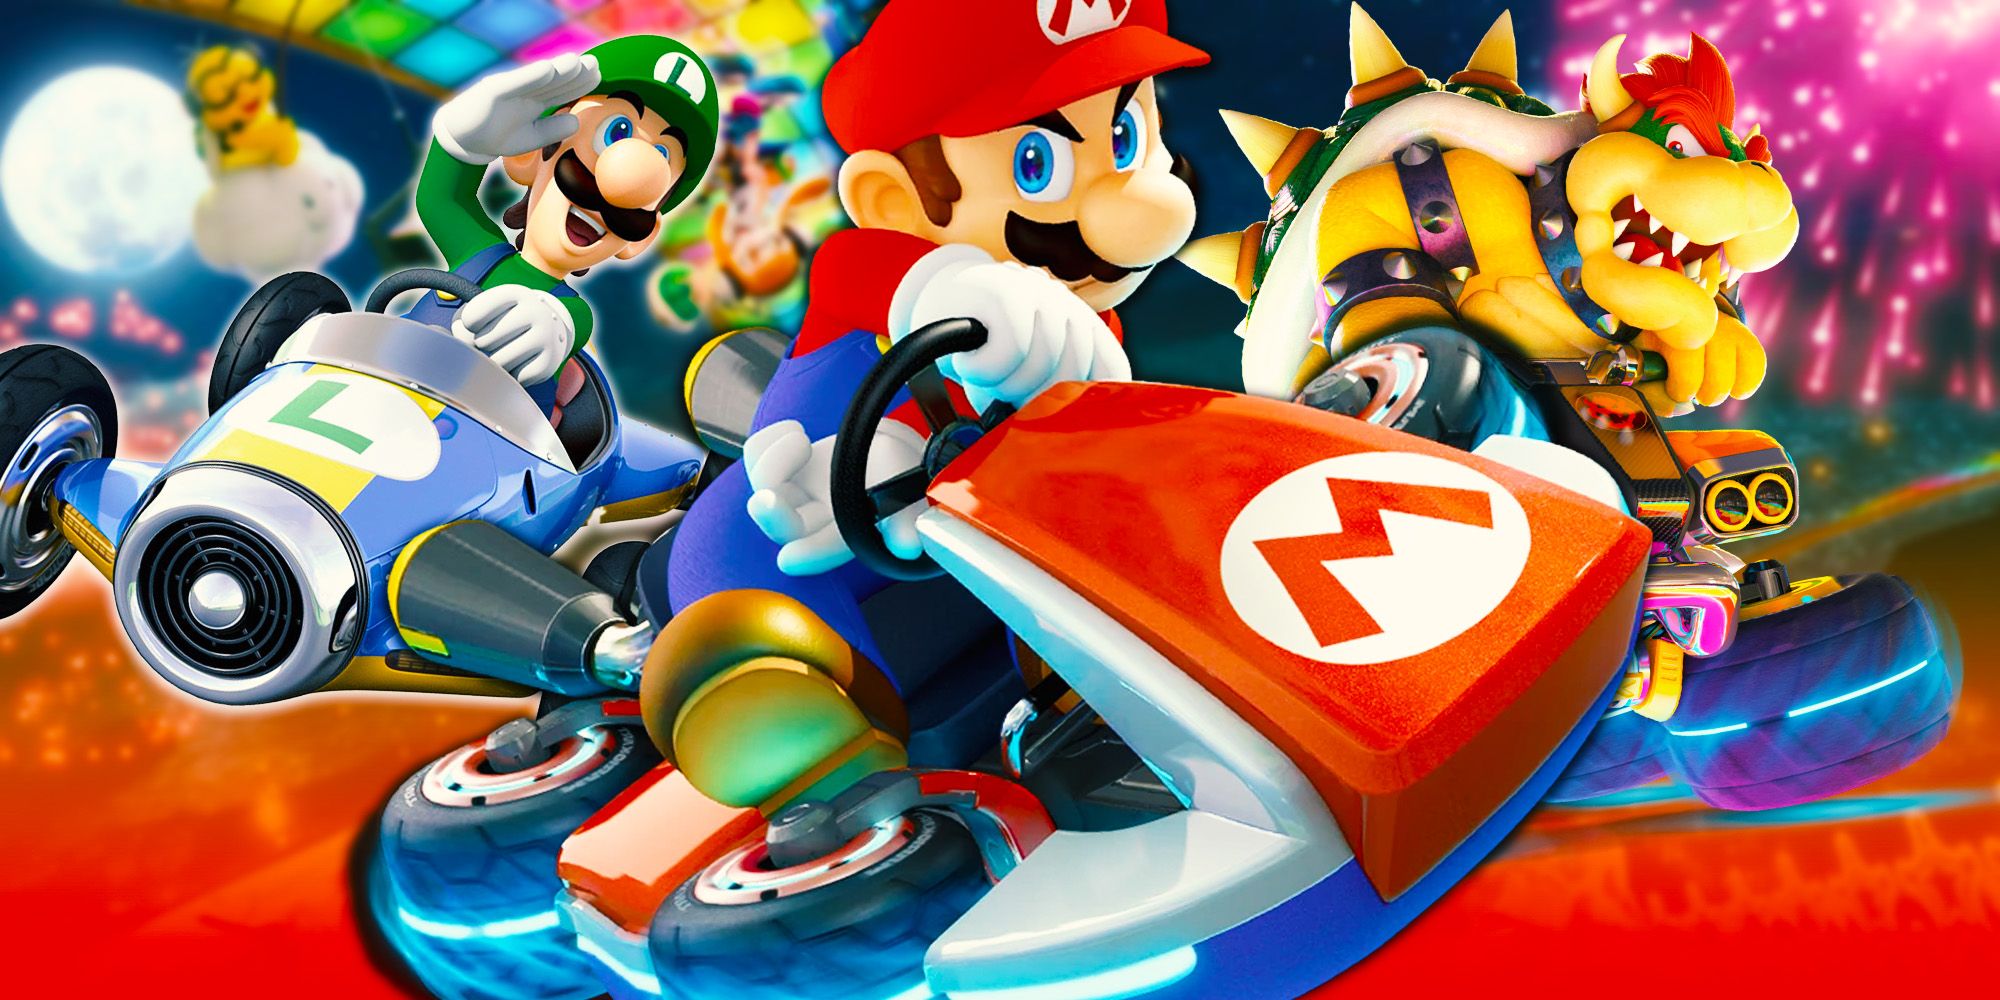 Mario, Luigi and Booster in Mario Kart 8 Deluxe on a Rainbow Road